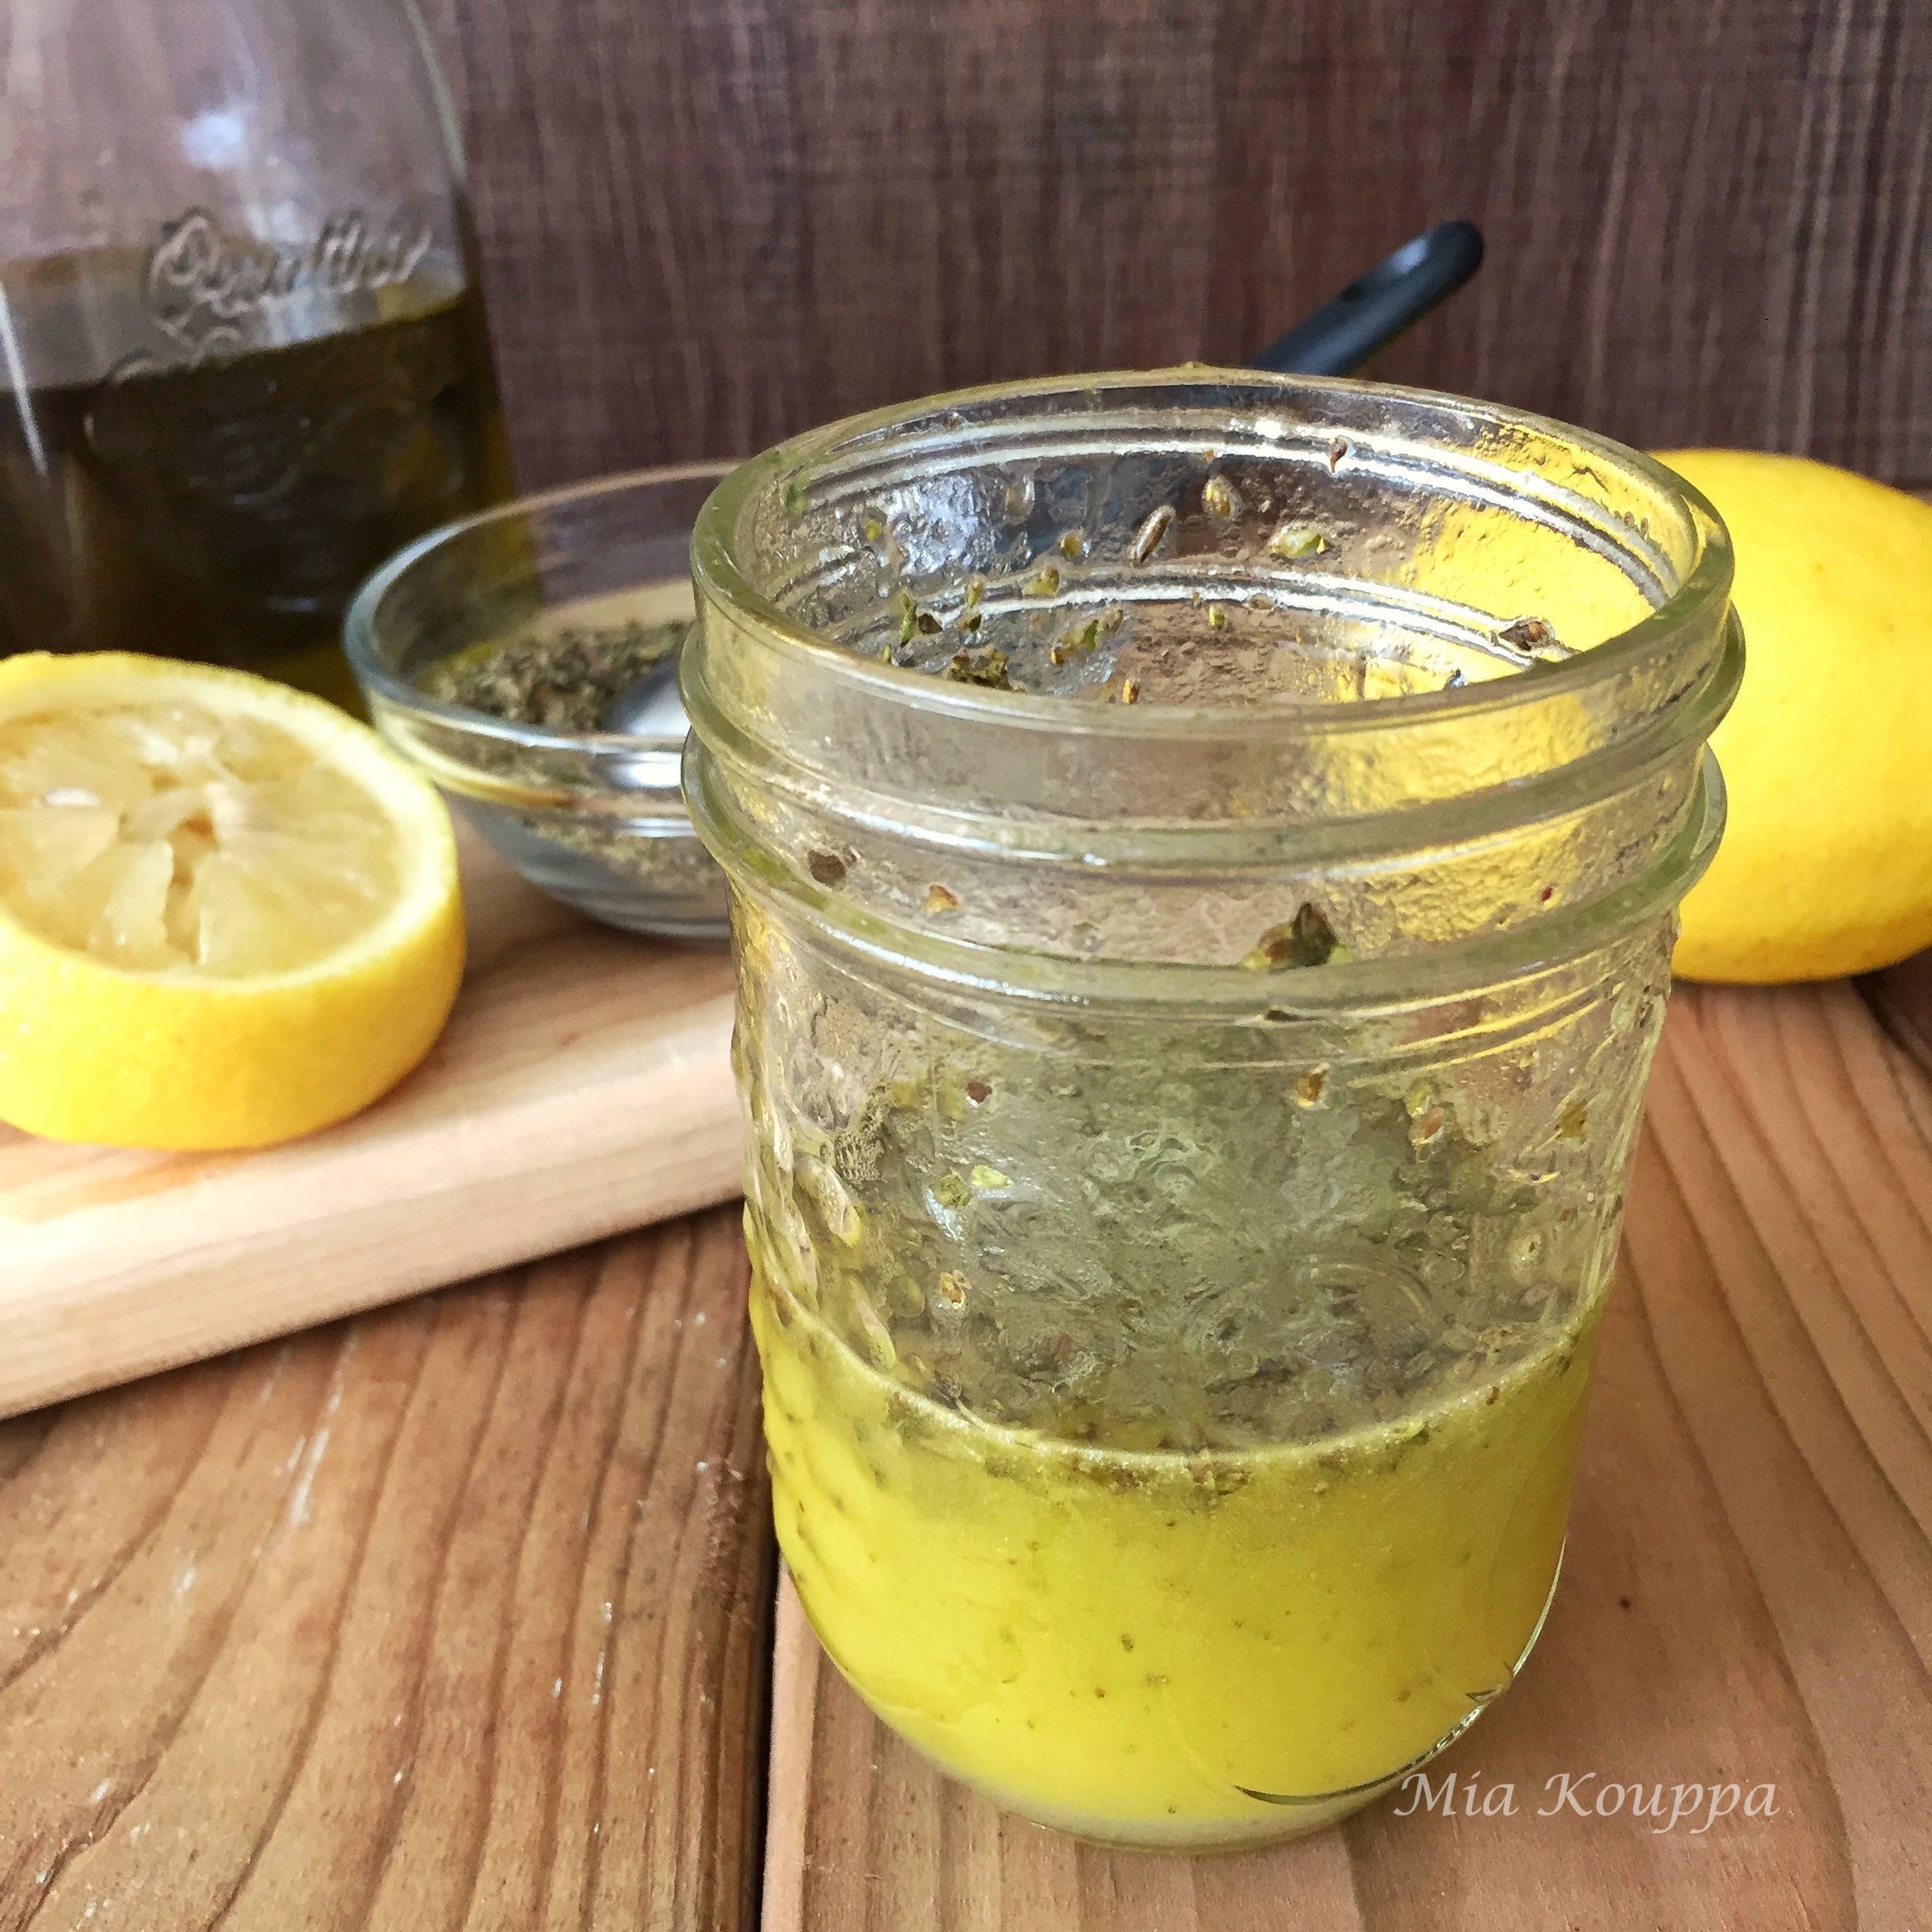 Olive oil and lemon sauce. An easy and delicious recipe of only 3 ingredients, to liven up your grilled meat or fish.